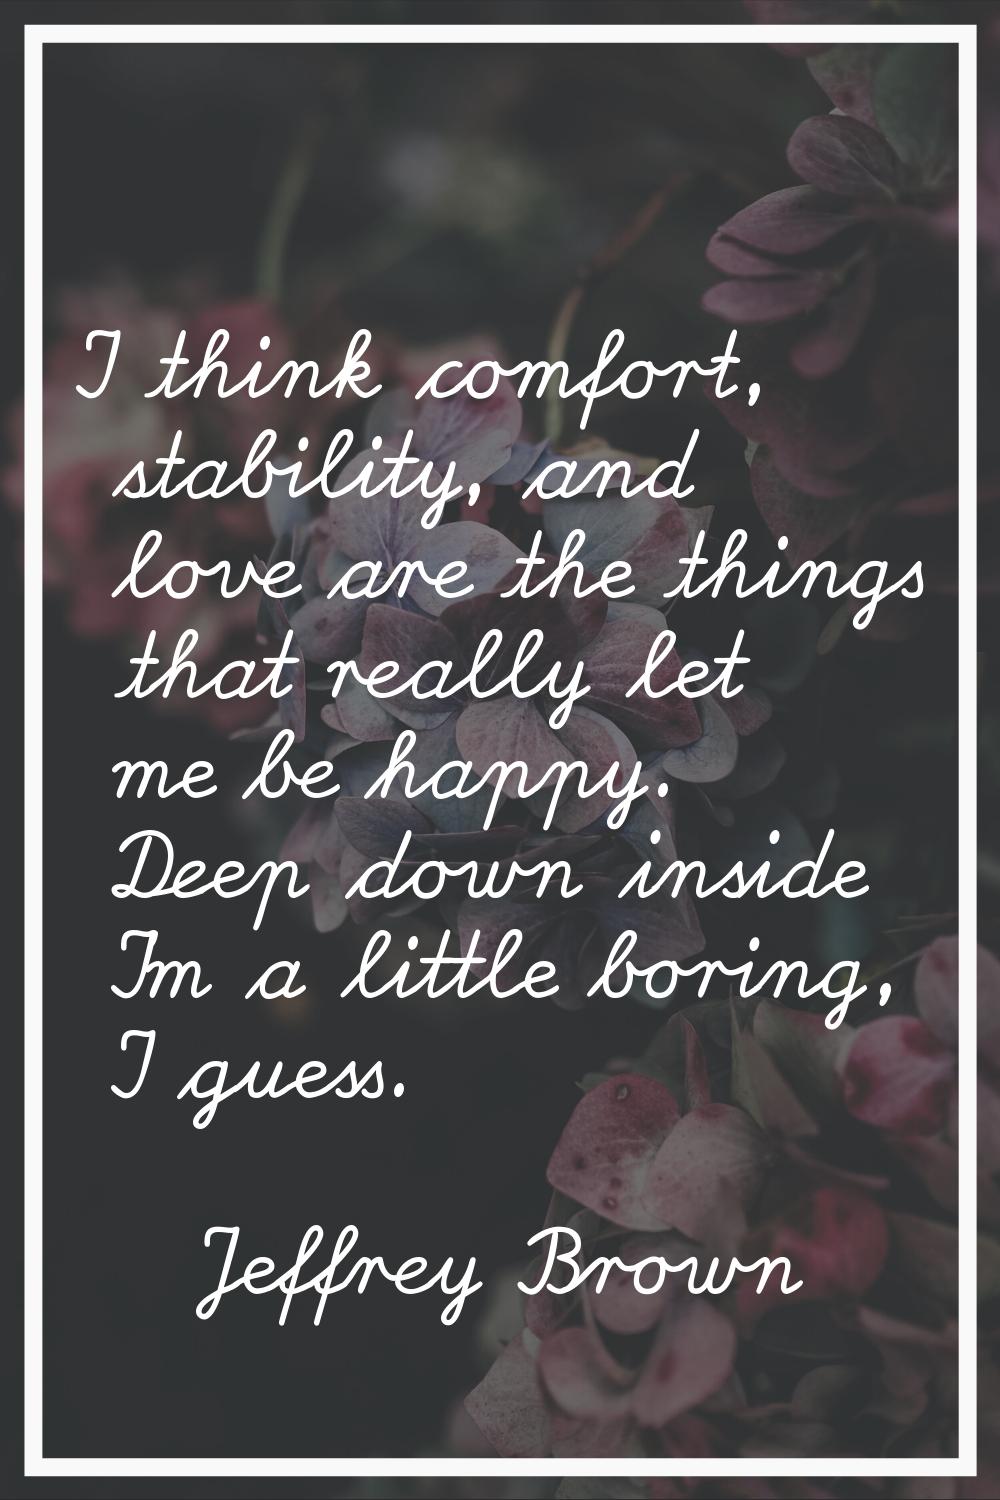 I think comfort, stability, and love are the things that really let me be happy. Deep down inside I